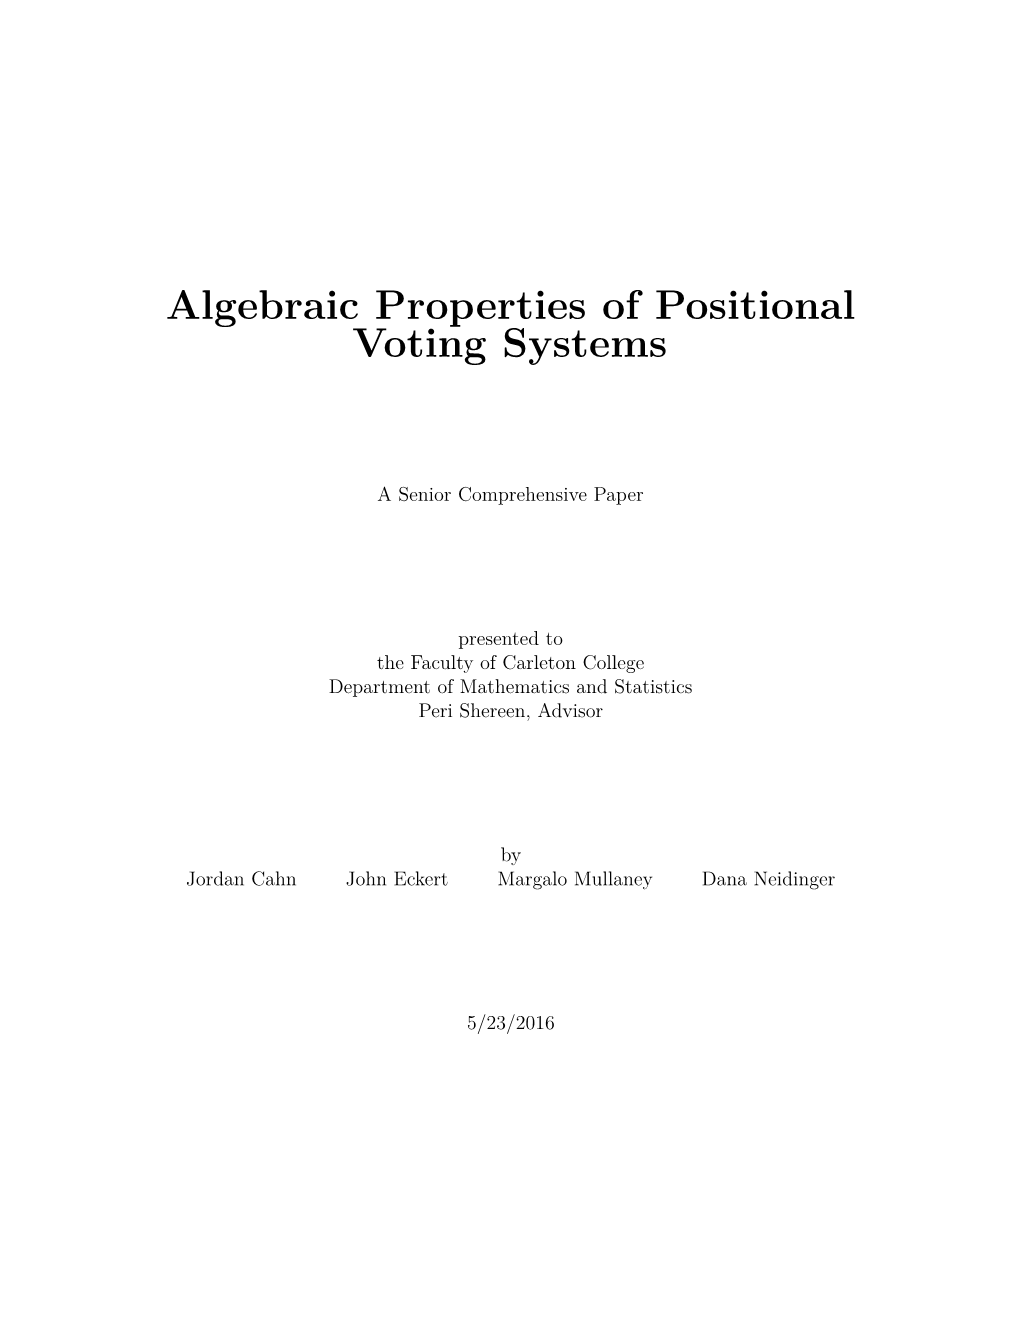 Algebraic Properties of Positional Voting Systems